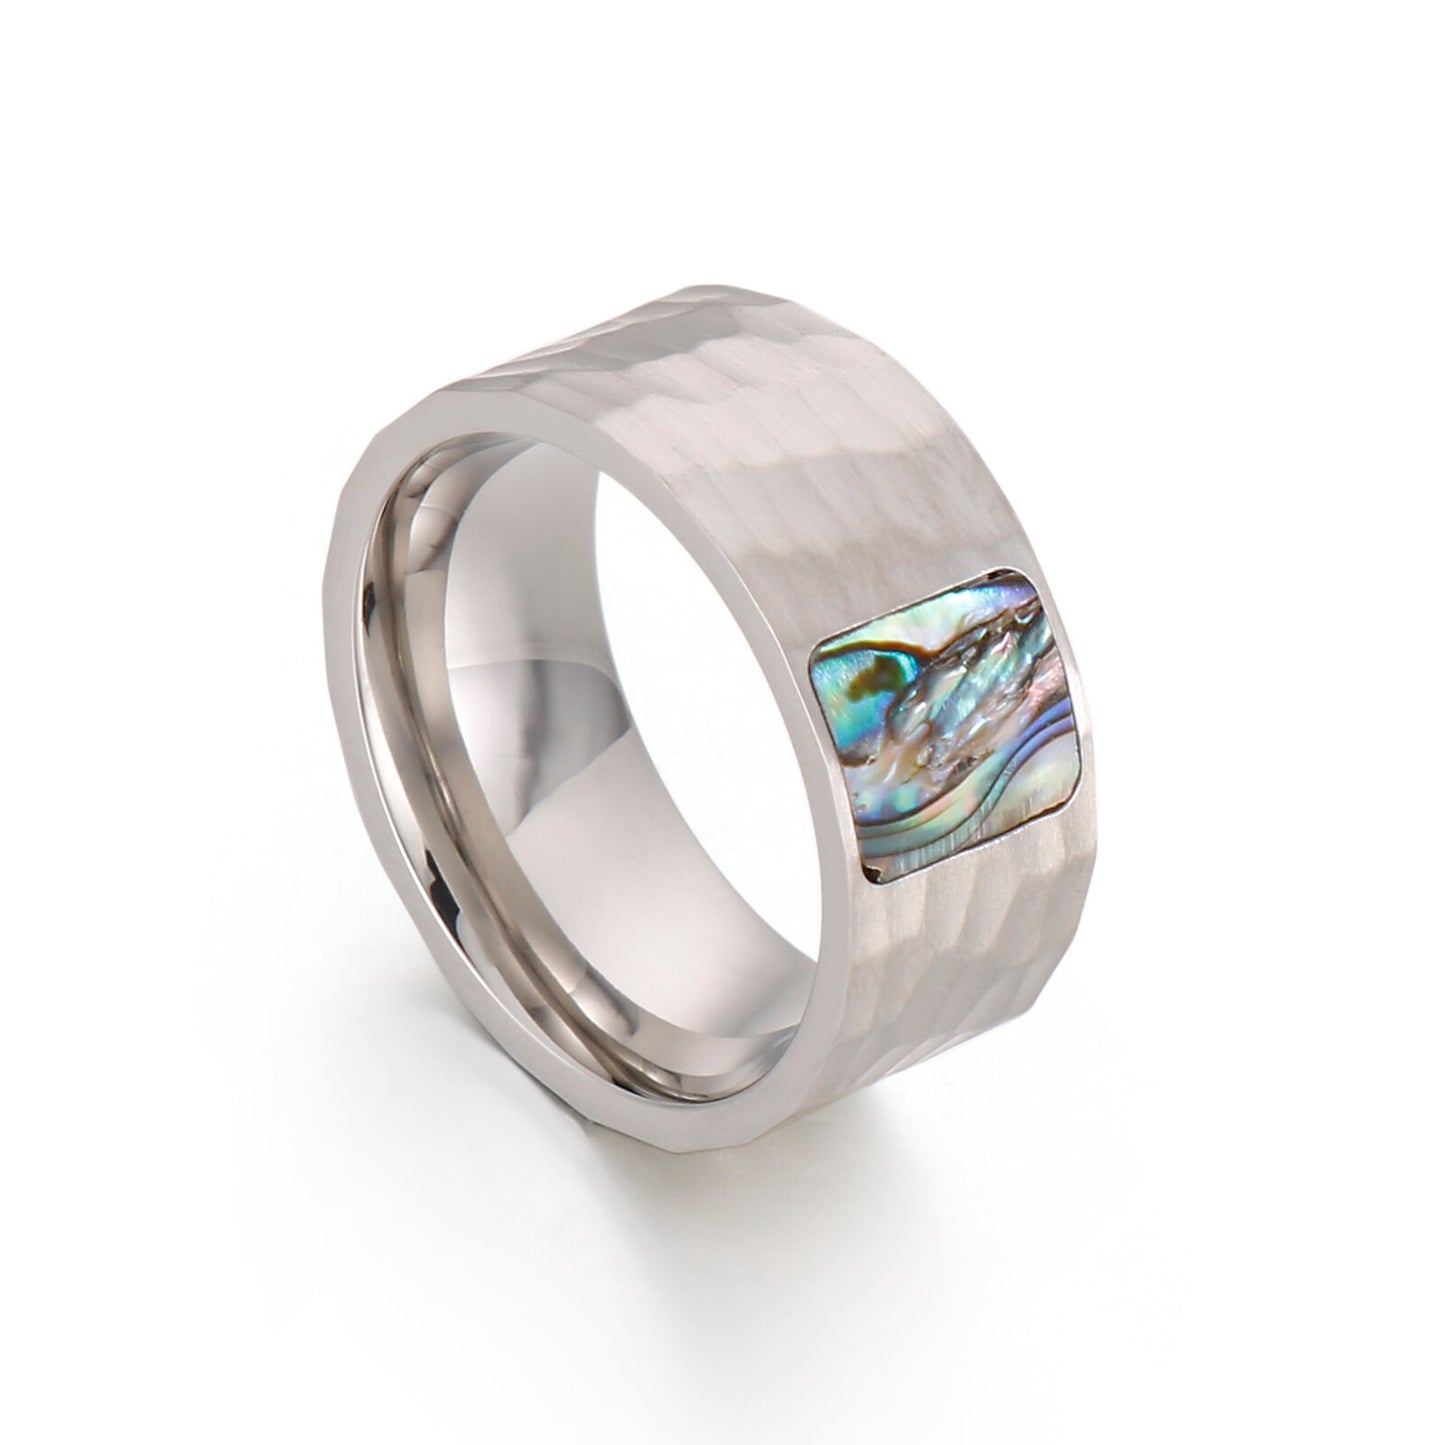 10mm Hammered & Abalone Shell Inlay Men's Ring (2 colors)